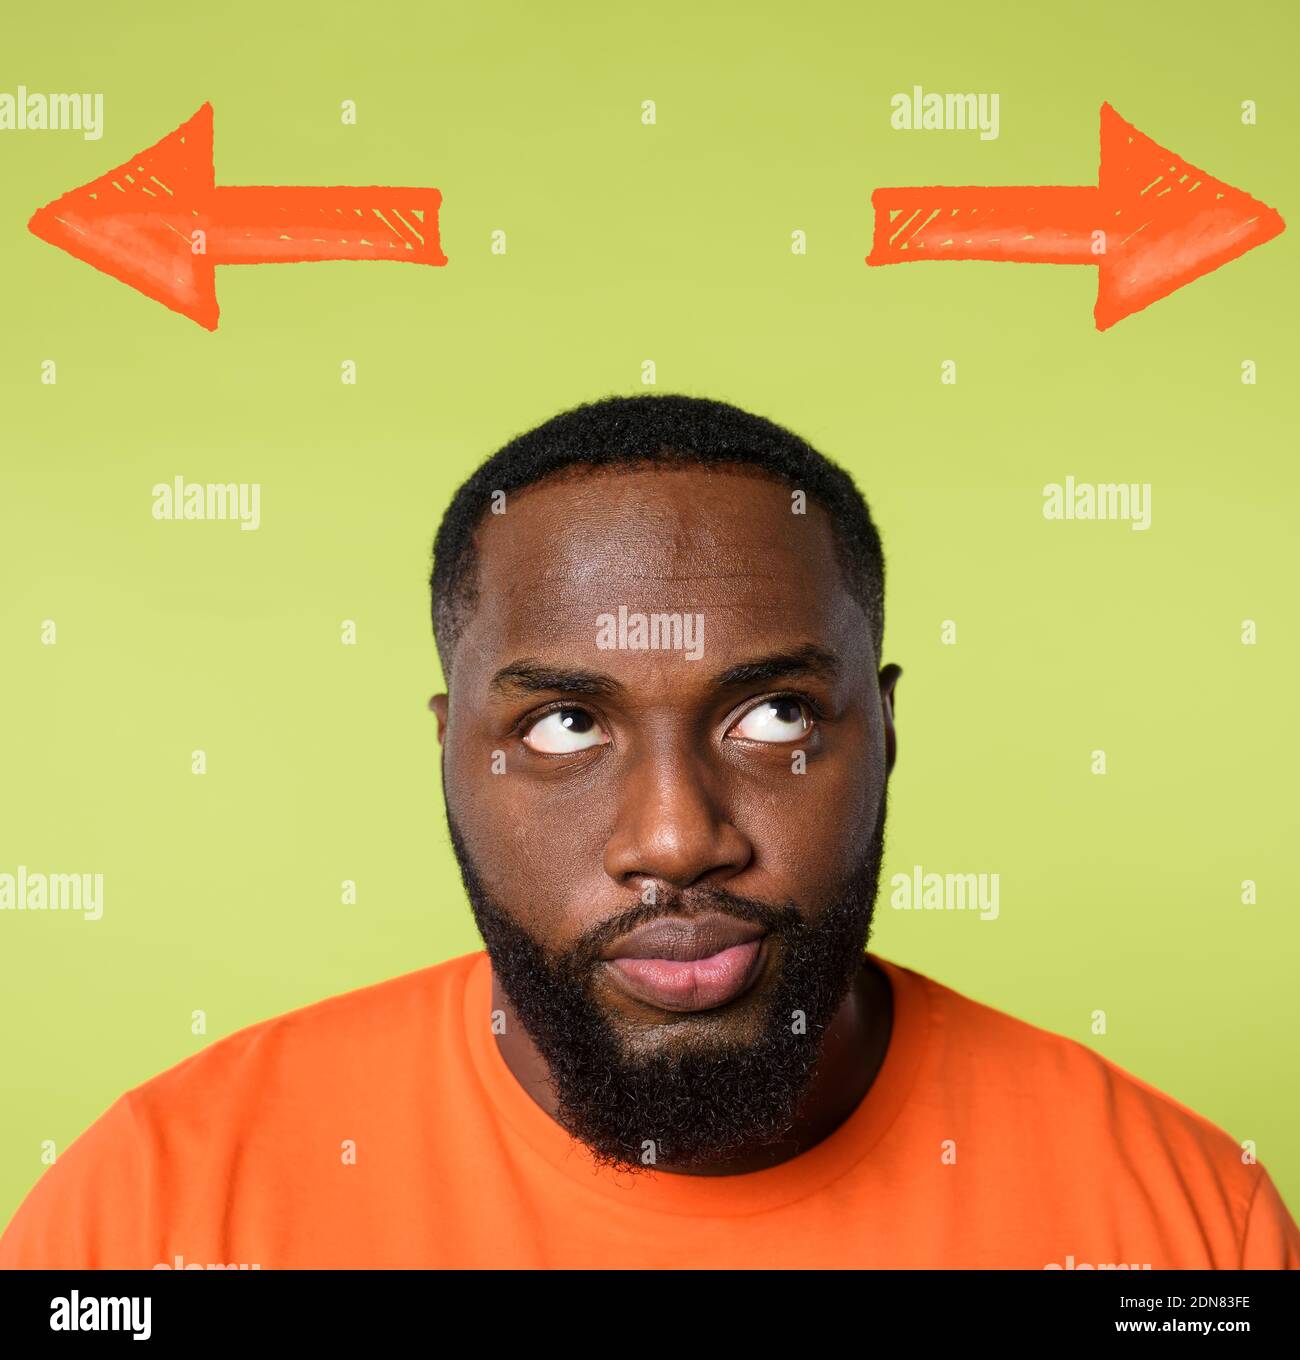 Confused black Man has to choose the right arrow to follow. Concept of options, confusion, decision. Stock Photo